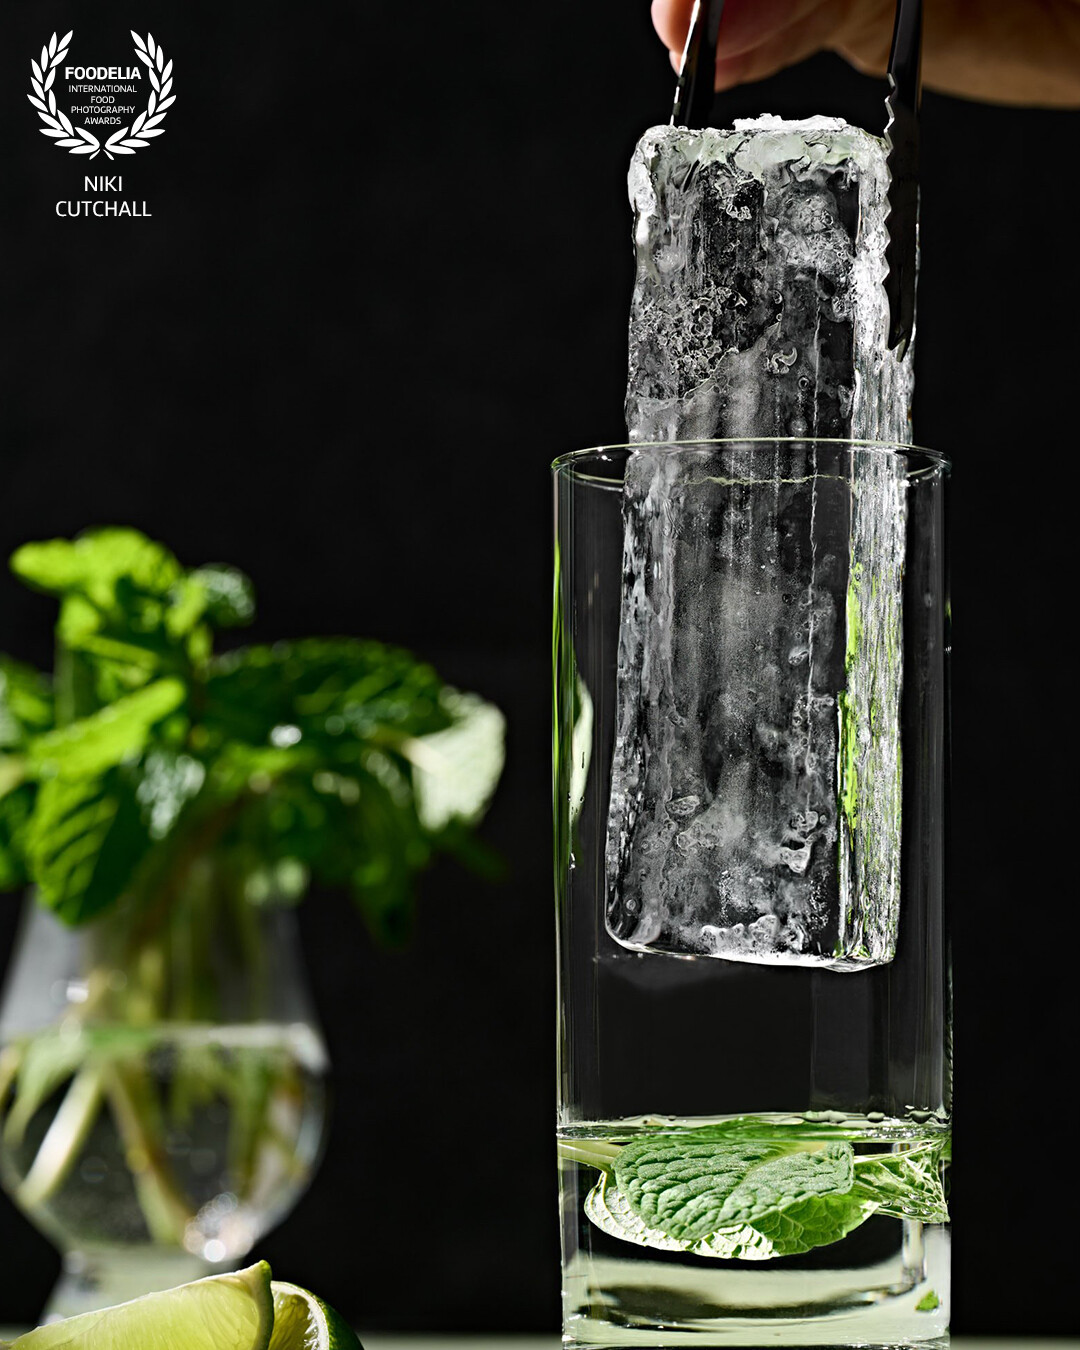 This was a fun personal shoot focused on capturing the beauty of the clear ice and the movement of dropping it into the glass.